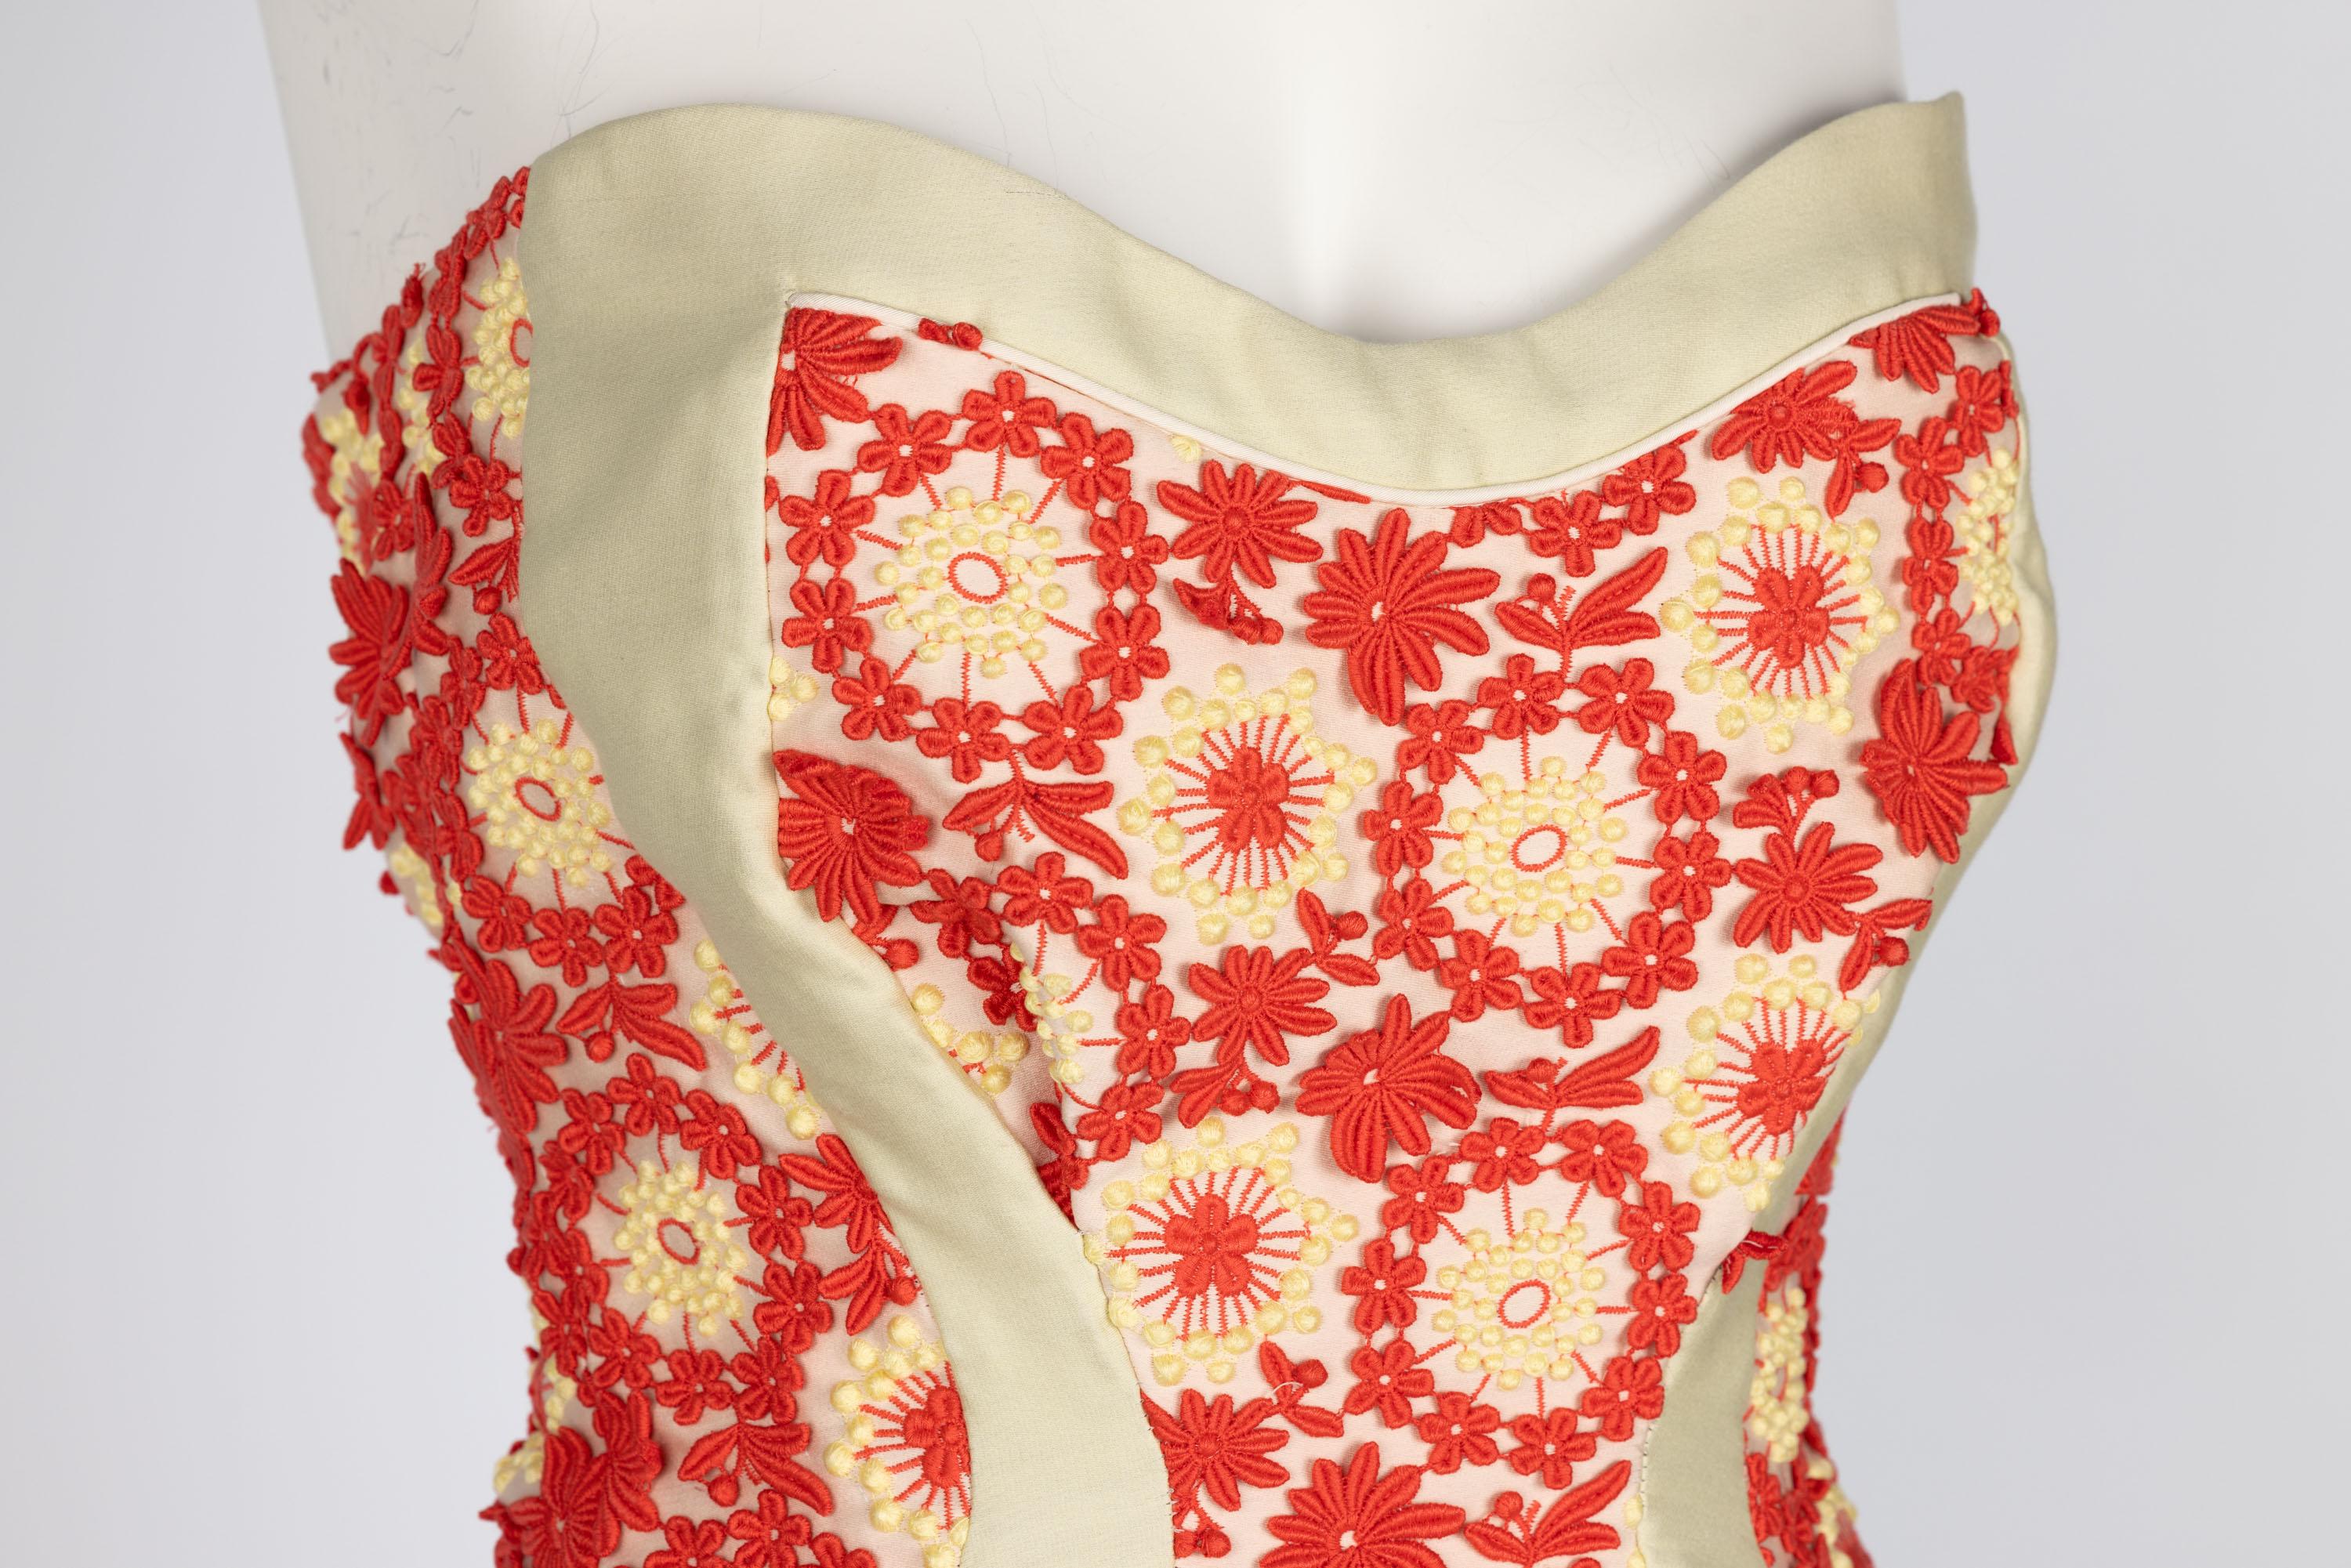 Prada Most Wanted Spring 2012 Floral Embroidered Pinup Bodysuit For Sale 5